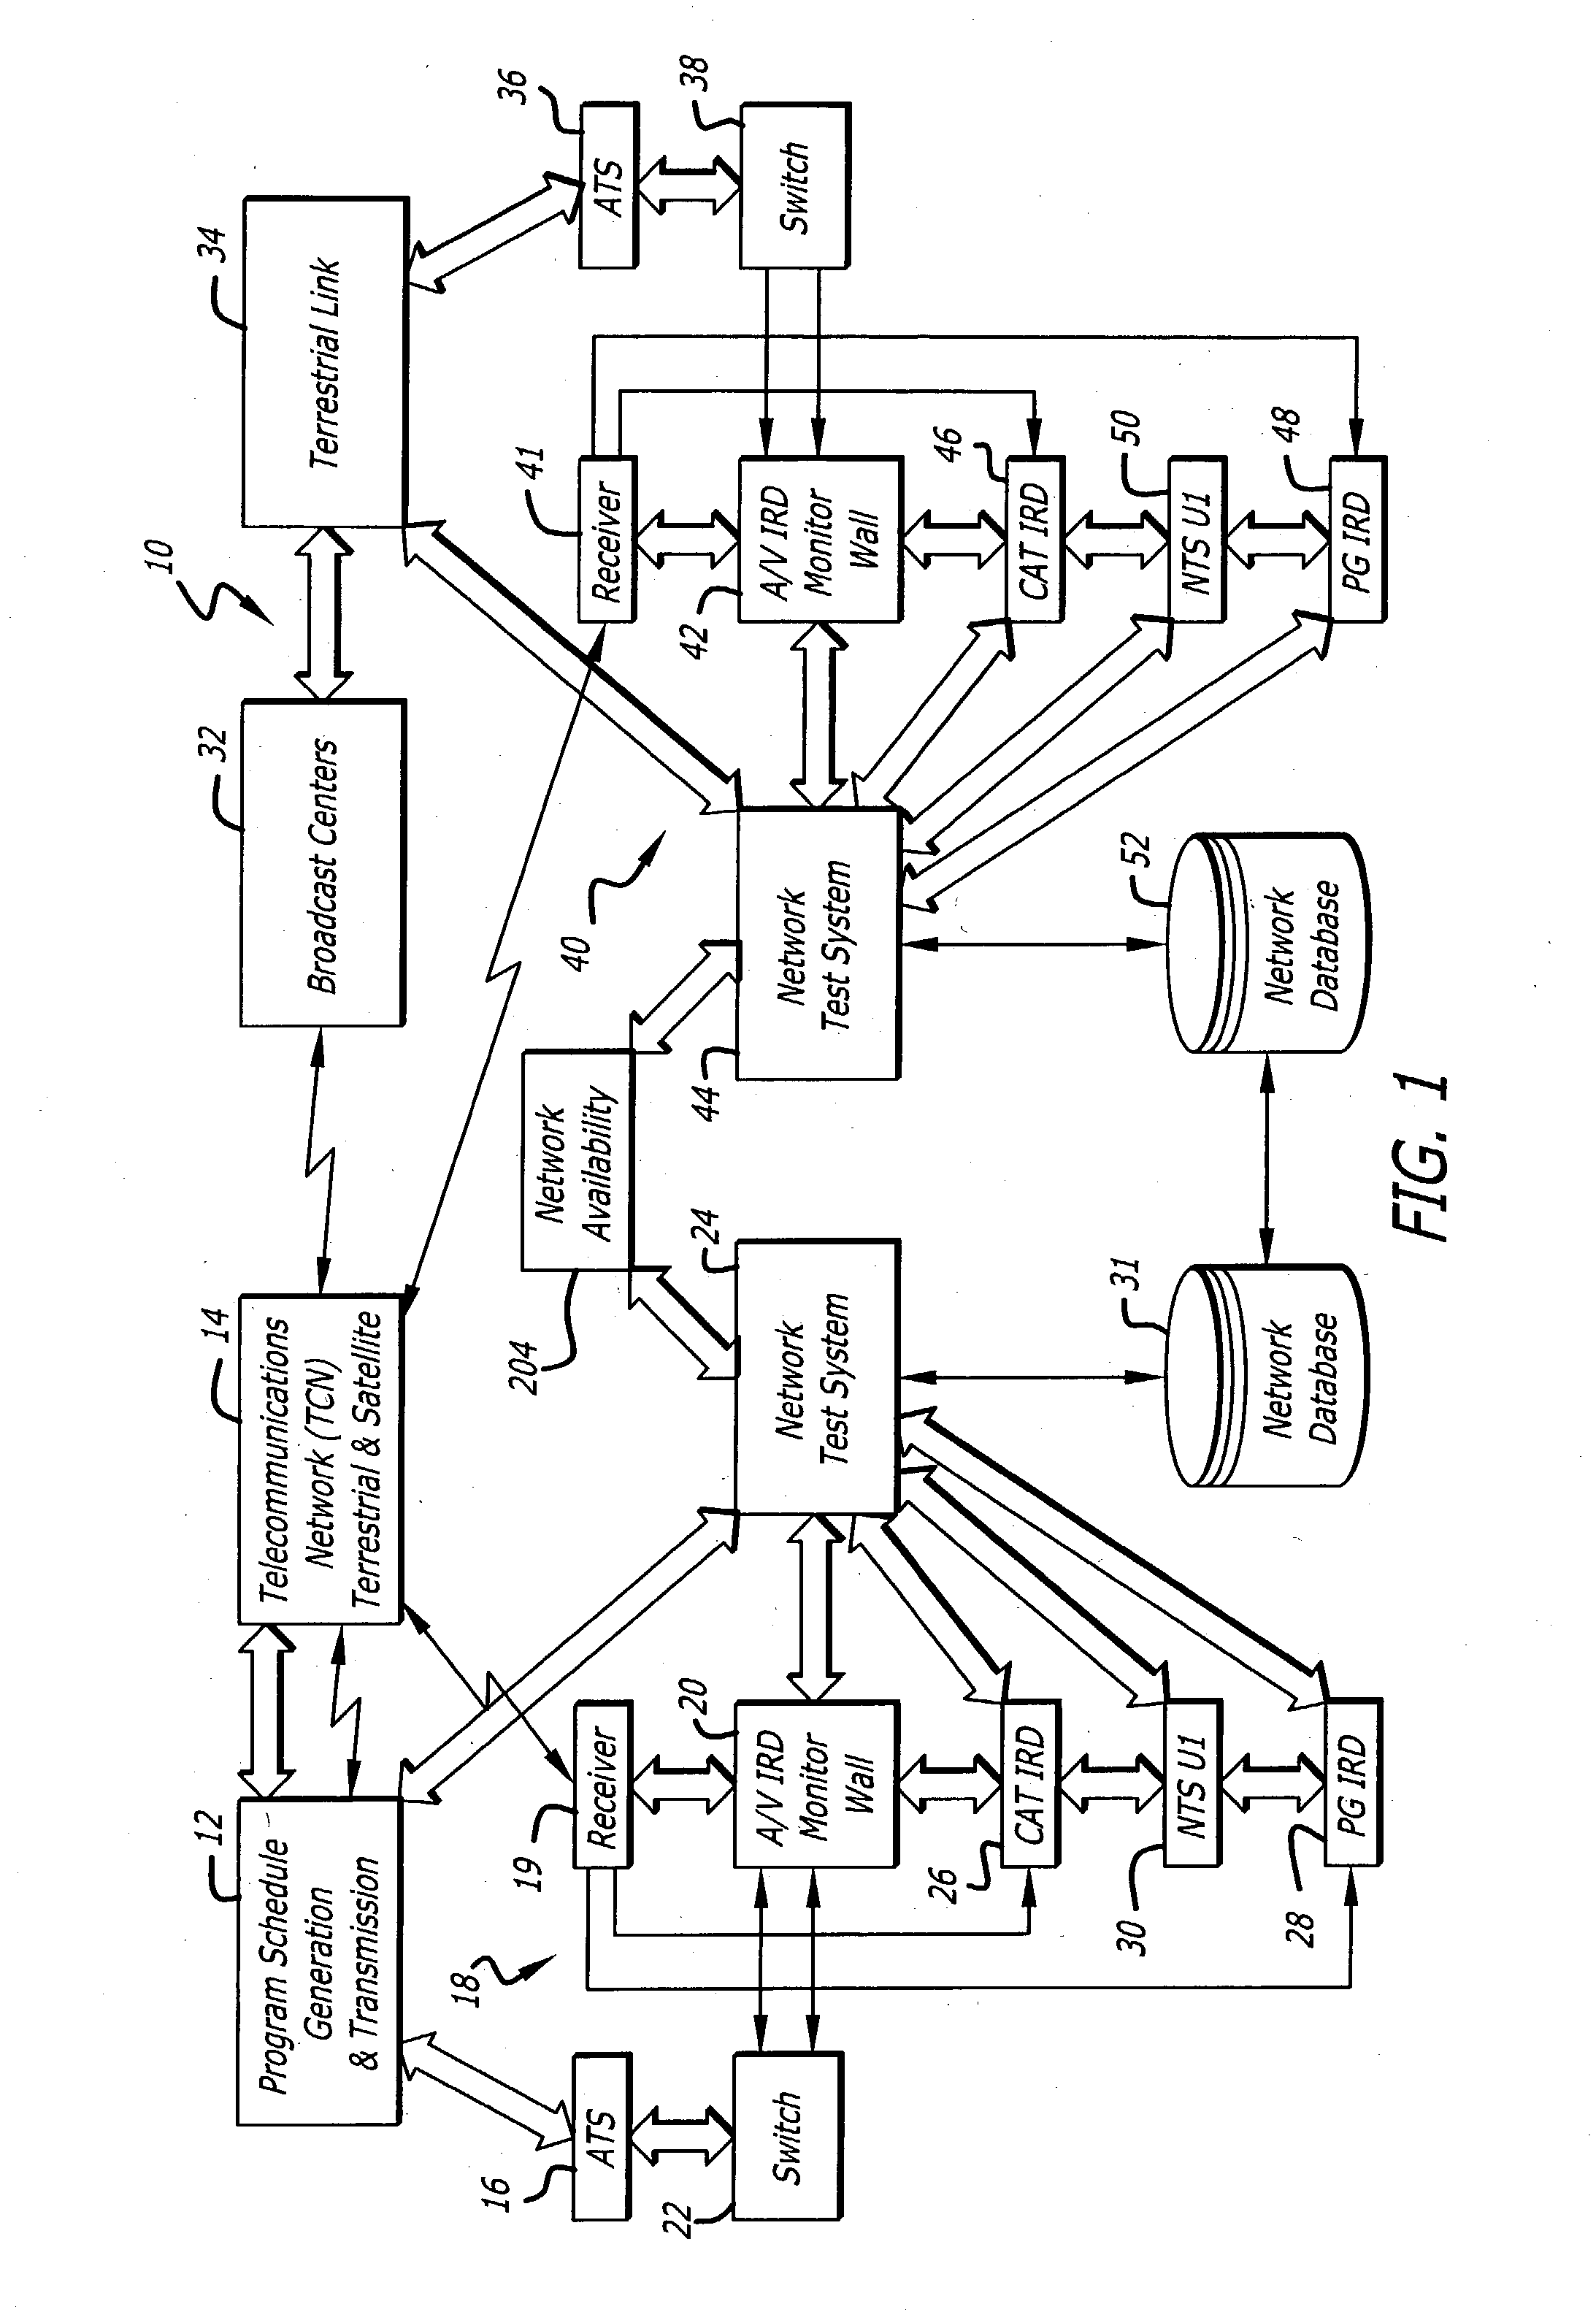 System for monitoring direct broadcast wireless signals